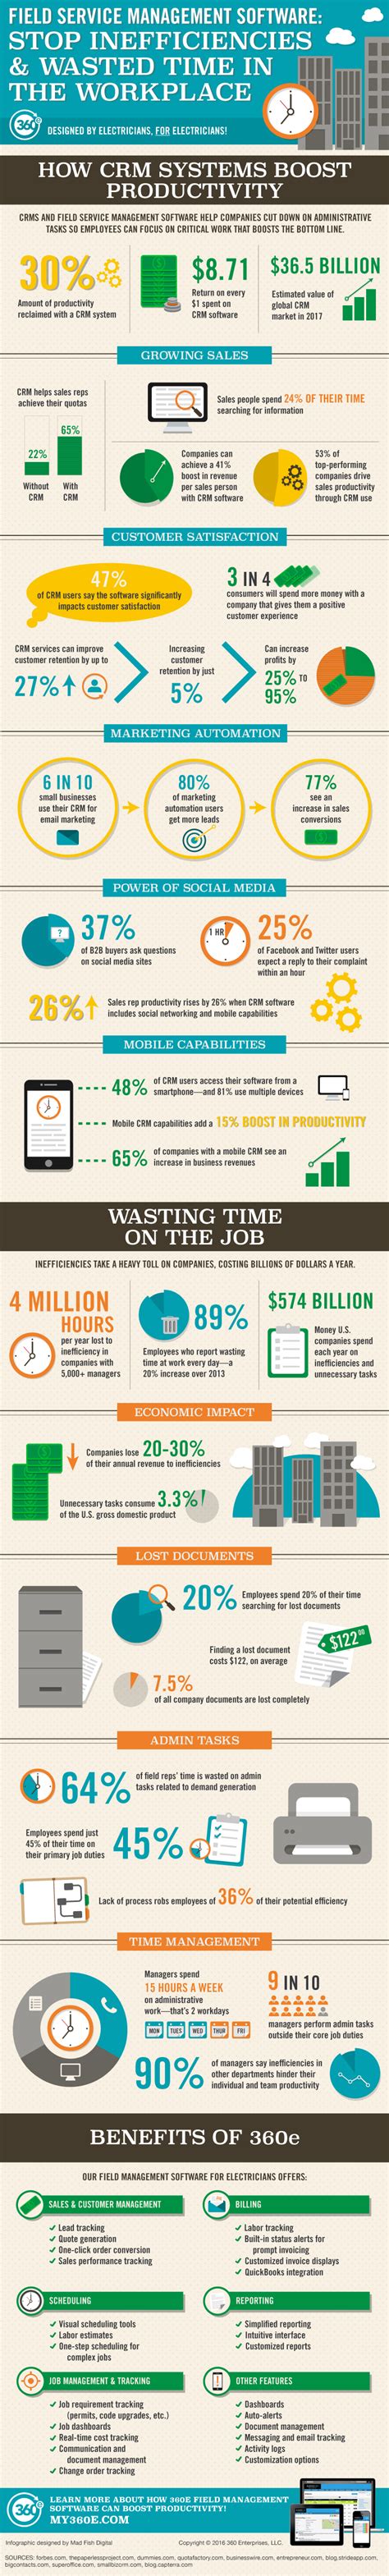 Stop Inefficiencies & Wasted Time In the Workplace